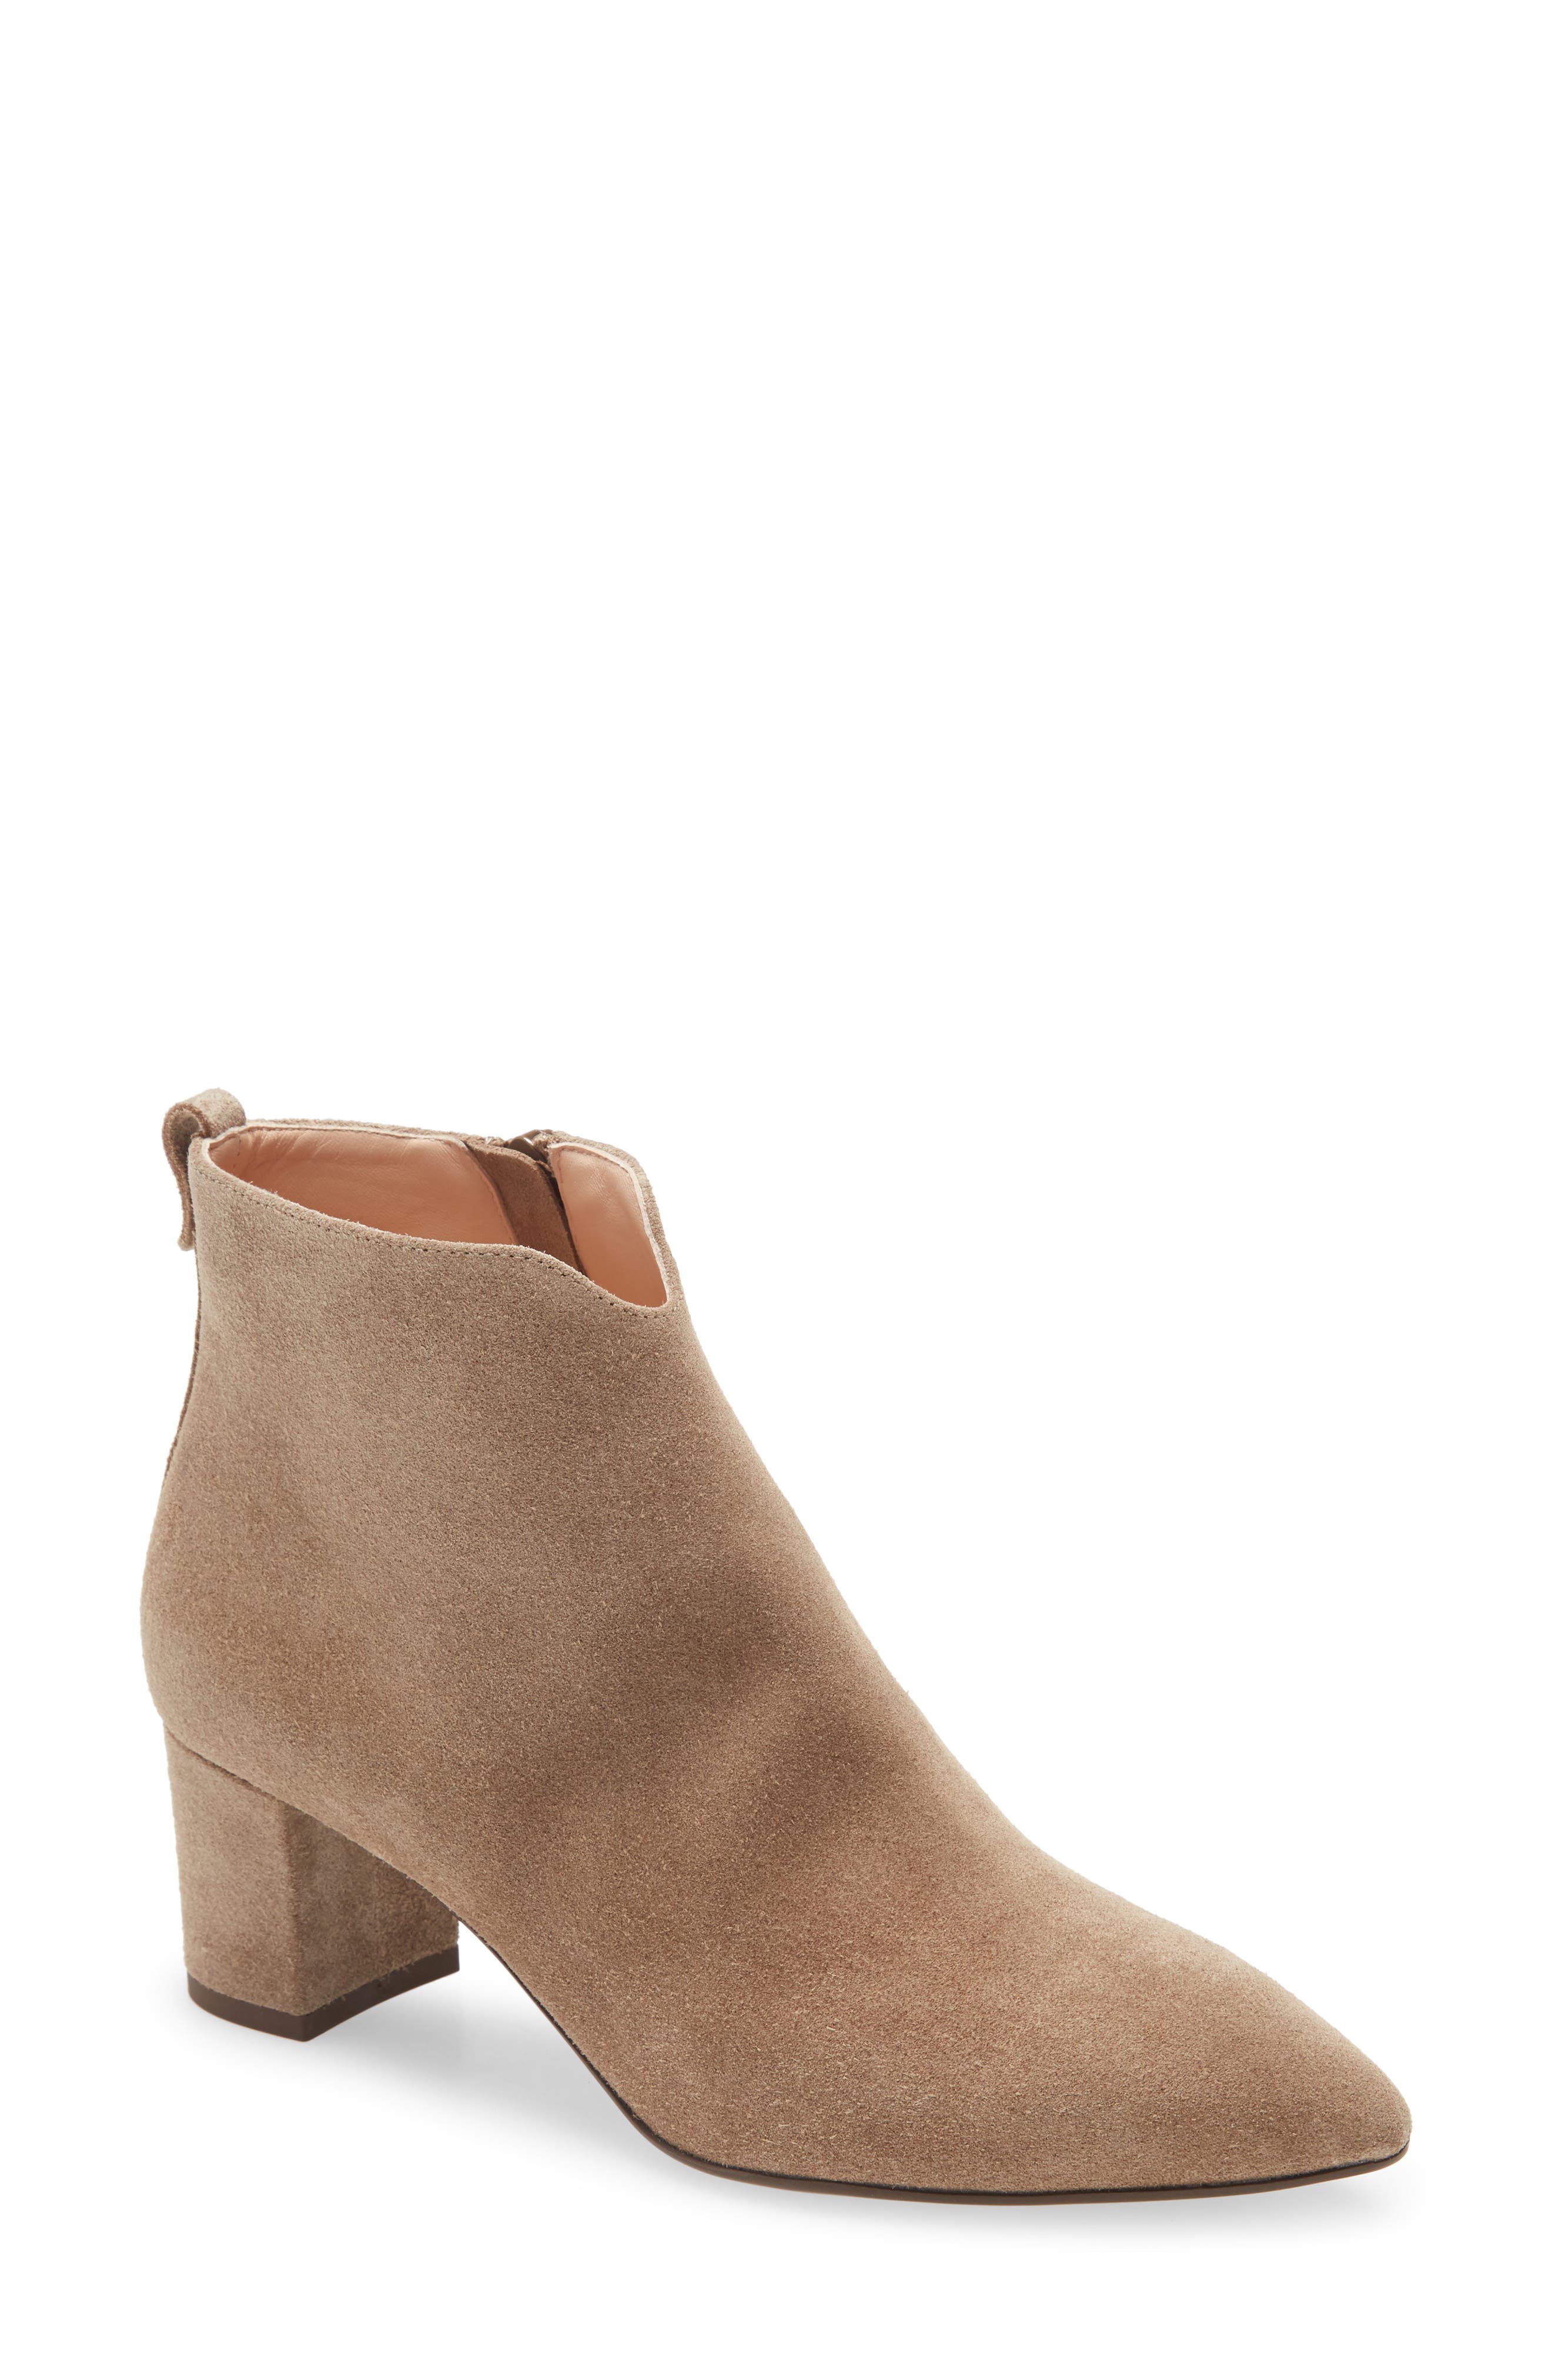 AGL Booties \u0026 Ankle Boots | Nordstrom